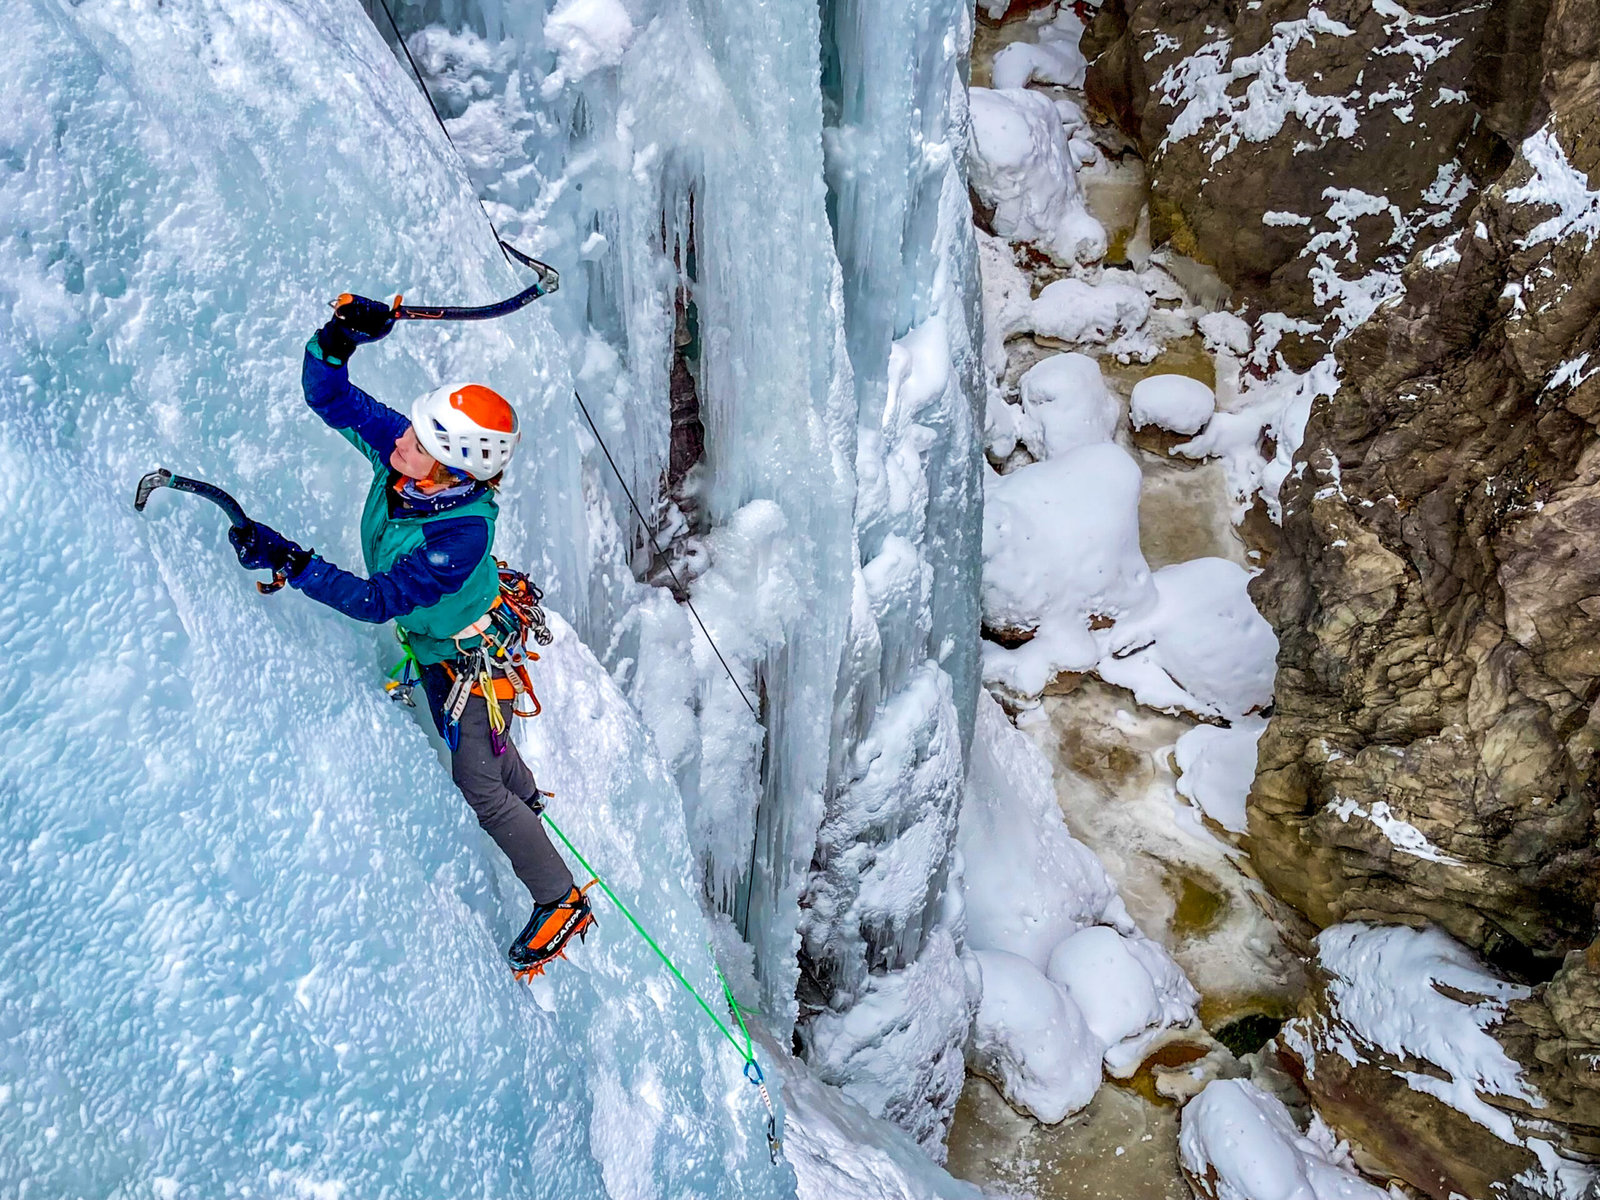 A climber at the Ouray Ice Park with a deep ravine below.